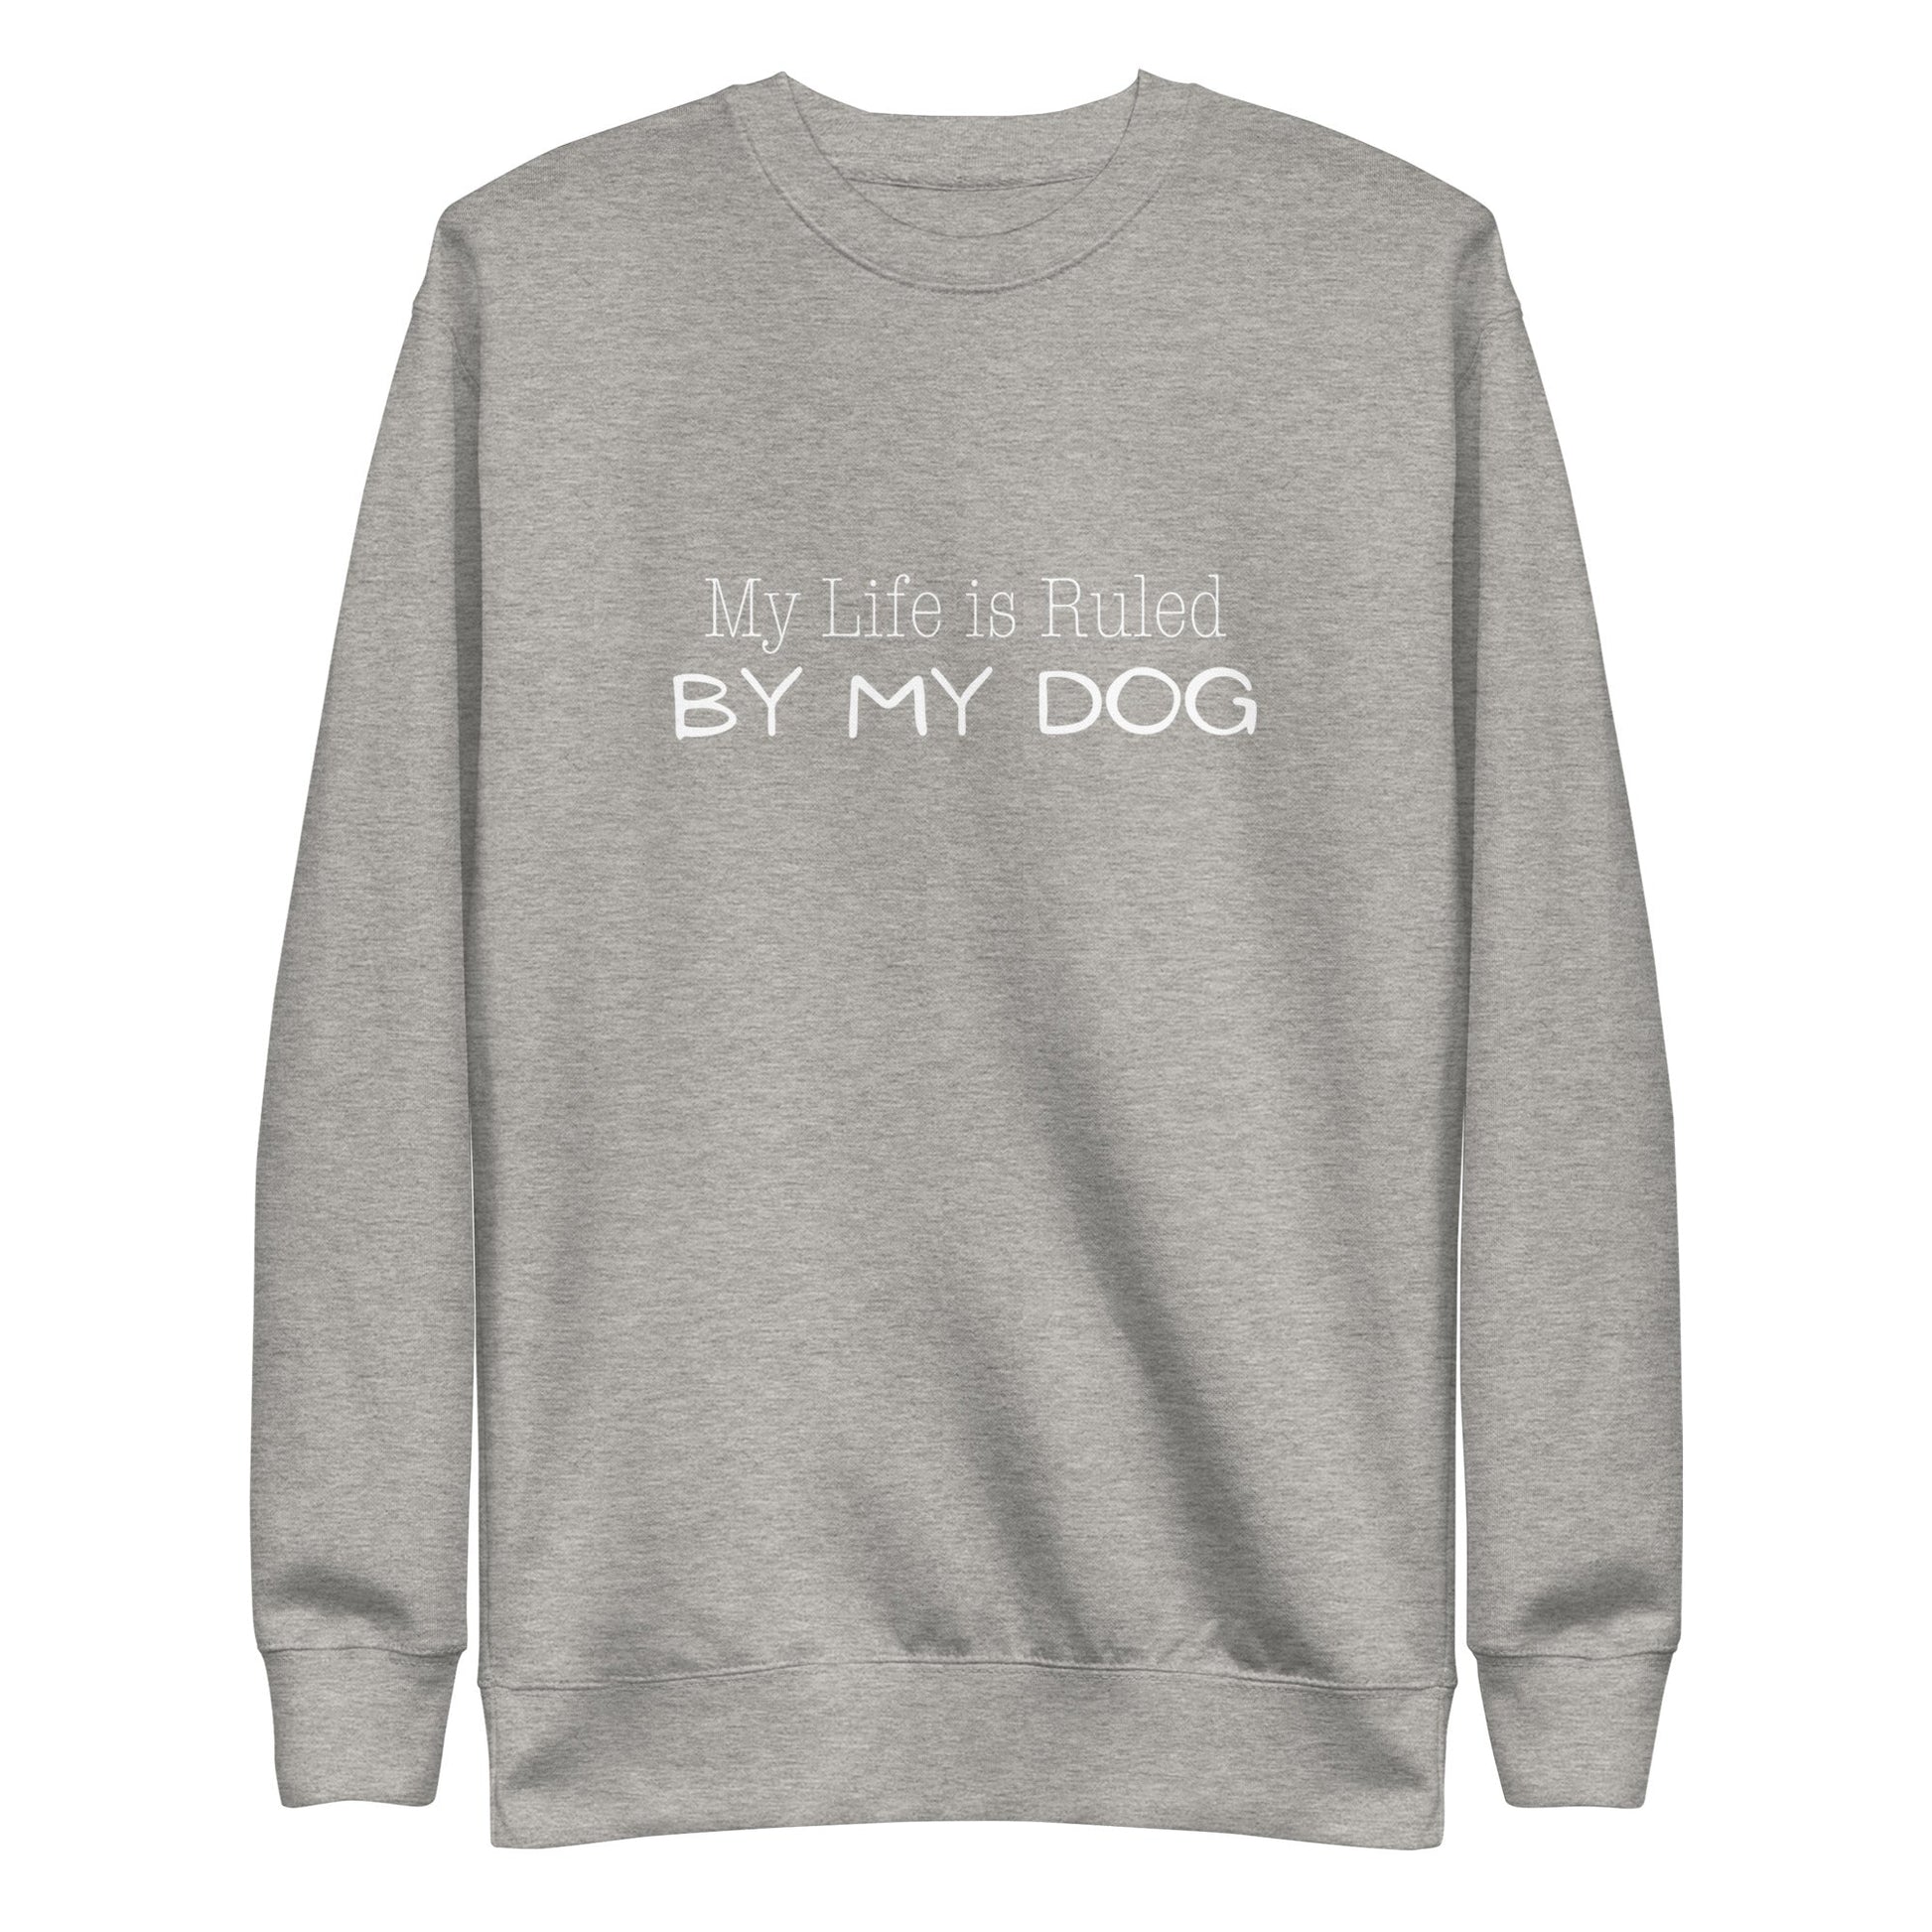 My Life is Ruled by Dog Sweatshirt - Carbon Grey / S